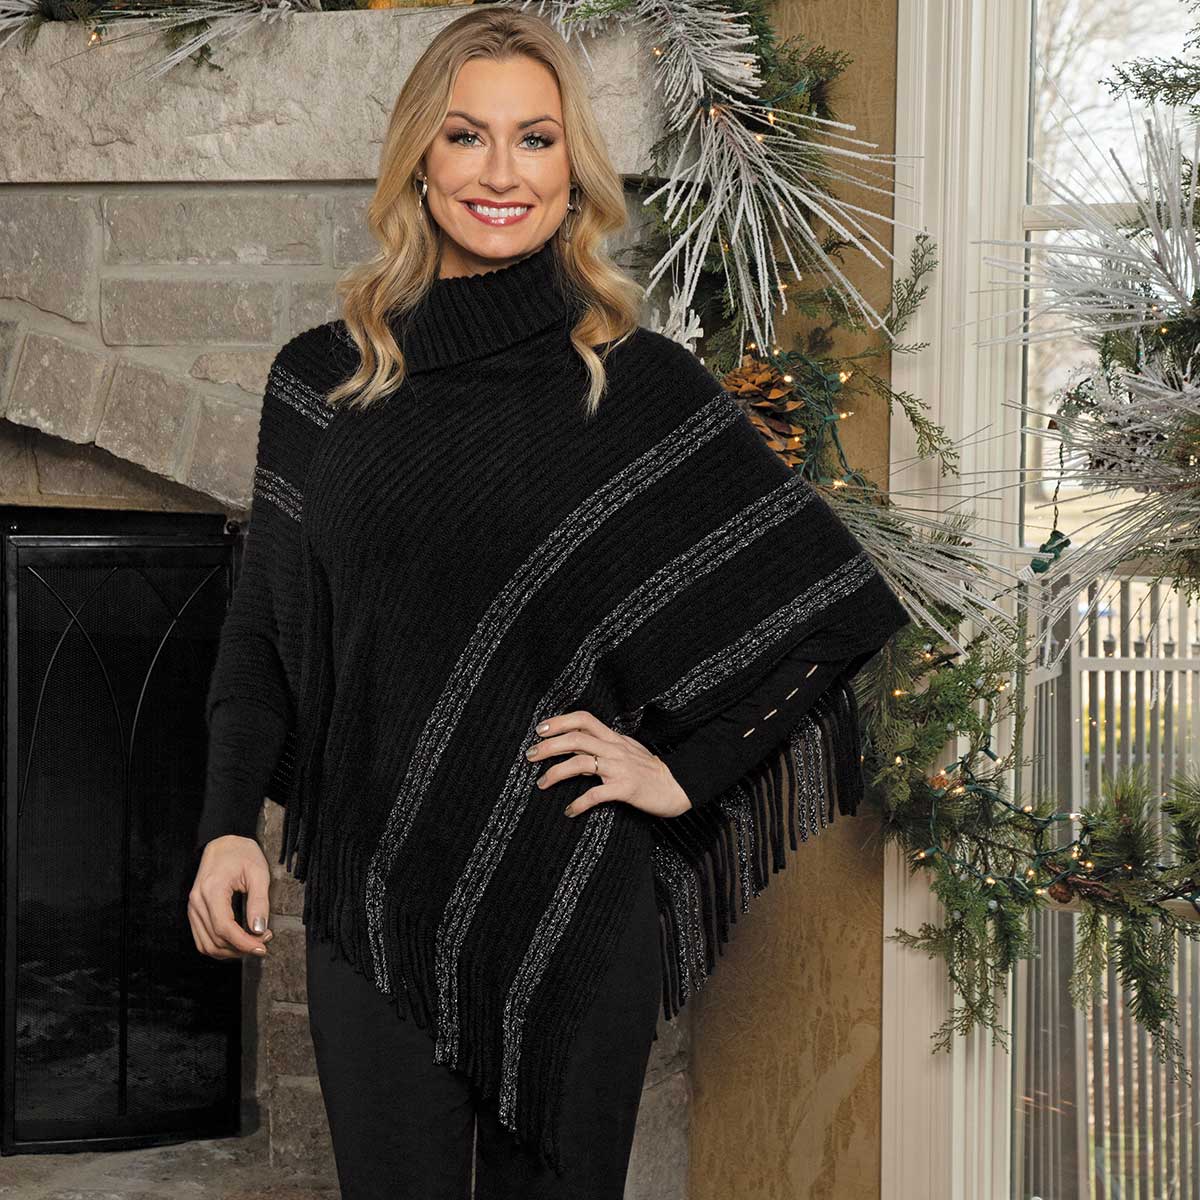 Black Knit Poncho with Collar and Fringe 36"x36"